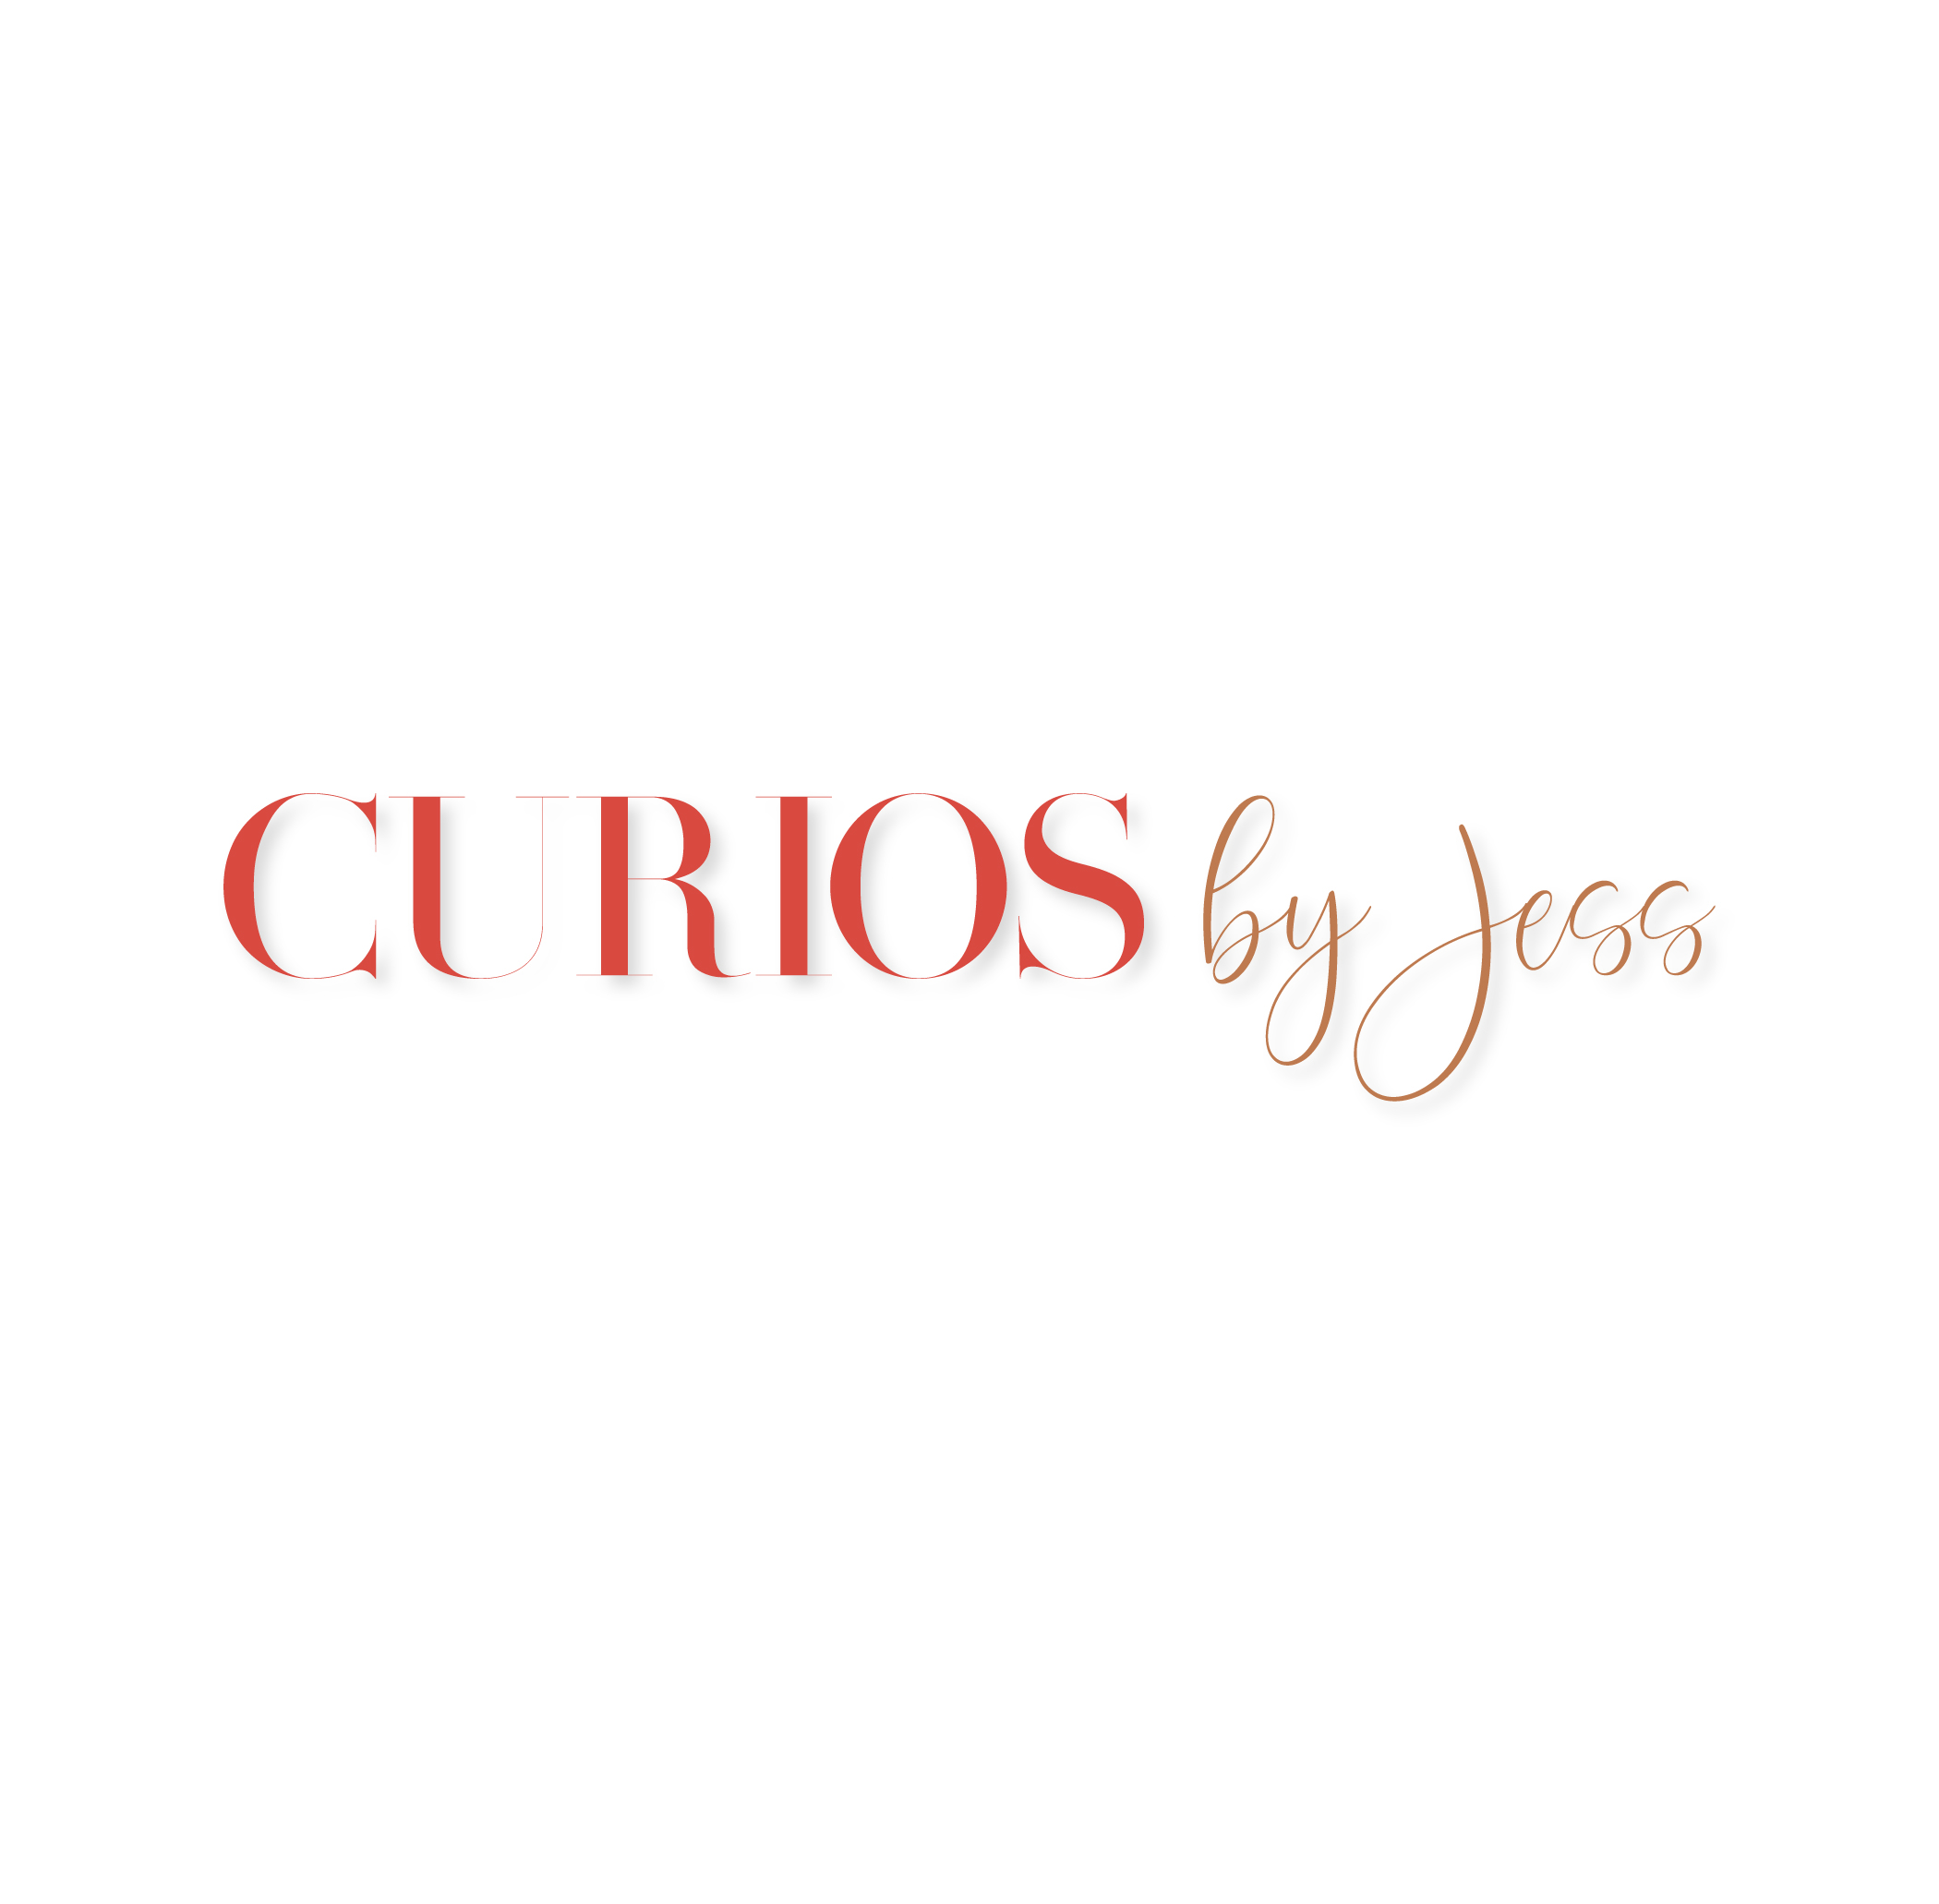 The logo or business face of "Curios by Jess"